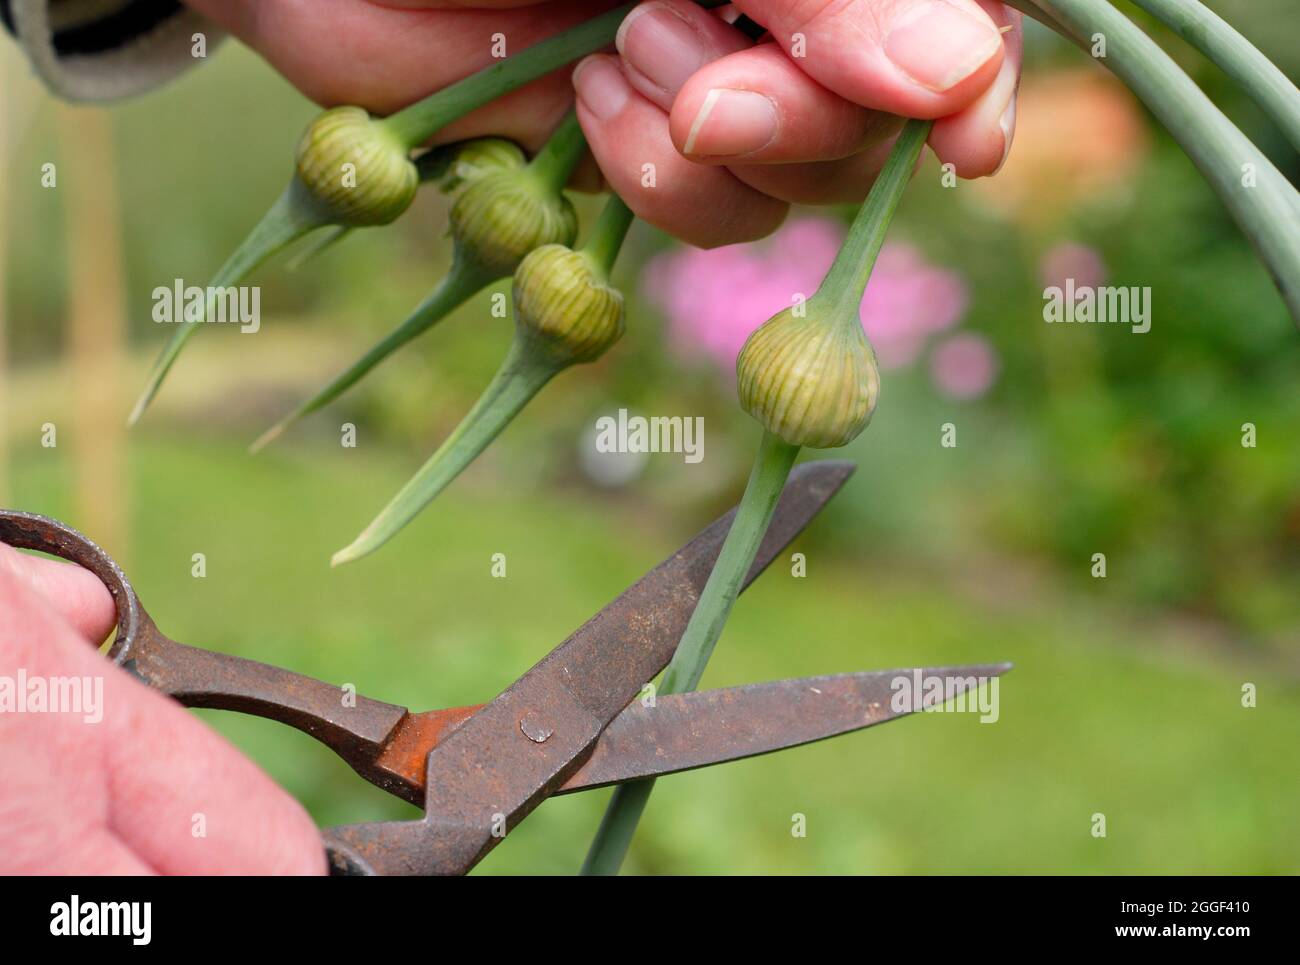 Garlic scapes. Removing the edible flowering spikes of Elephant garlic to encourage enlargement of the bulb and for cooking. Stock Photo